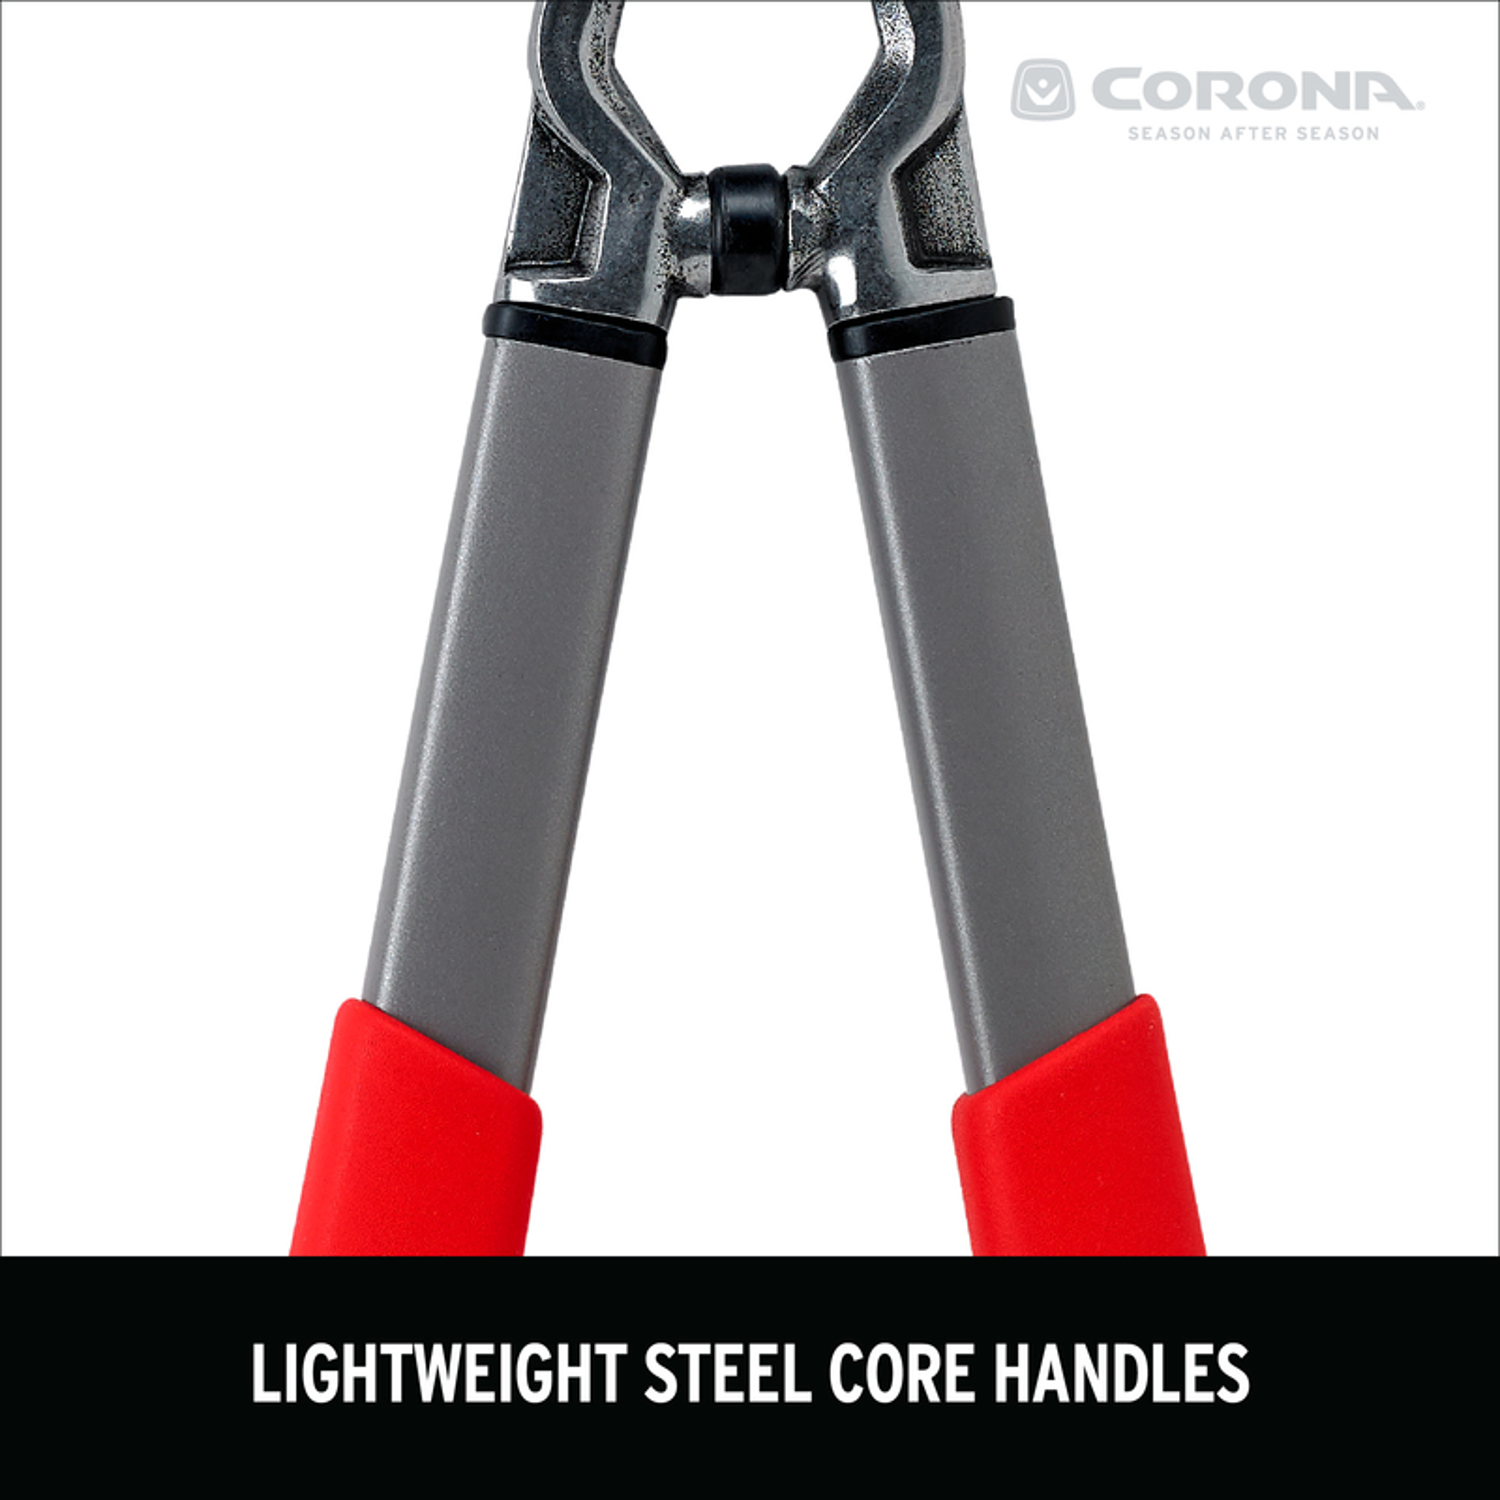 Corona ClassicCUT HS15150 10 in. Steel Hooked Hedge Shears - image 2 of 8